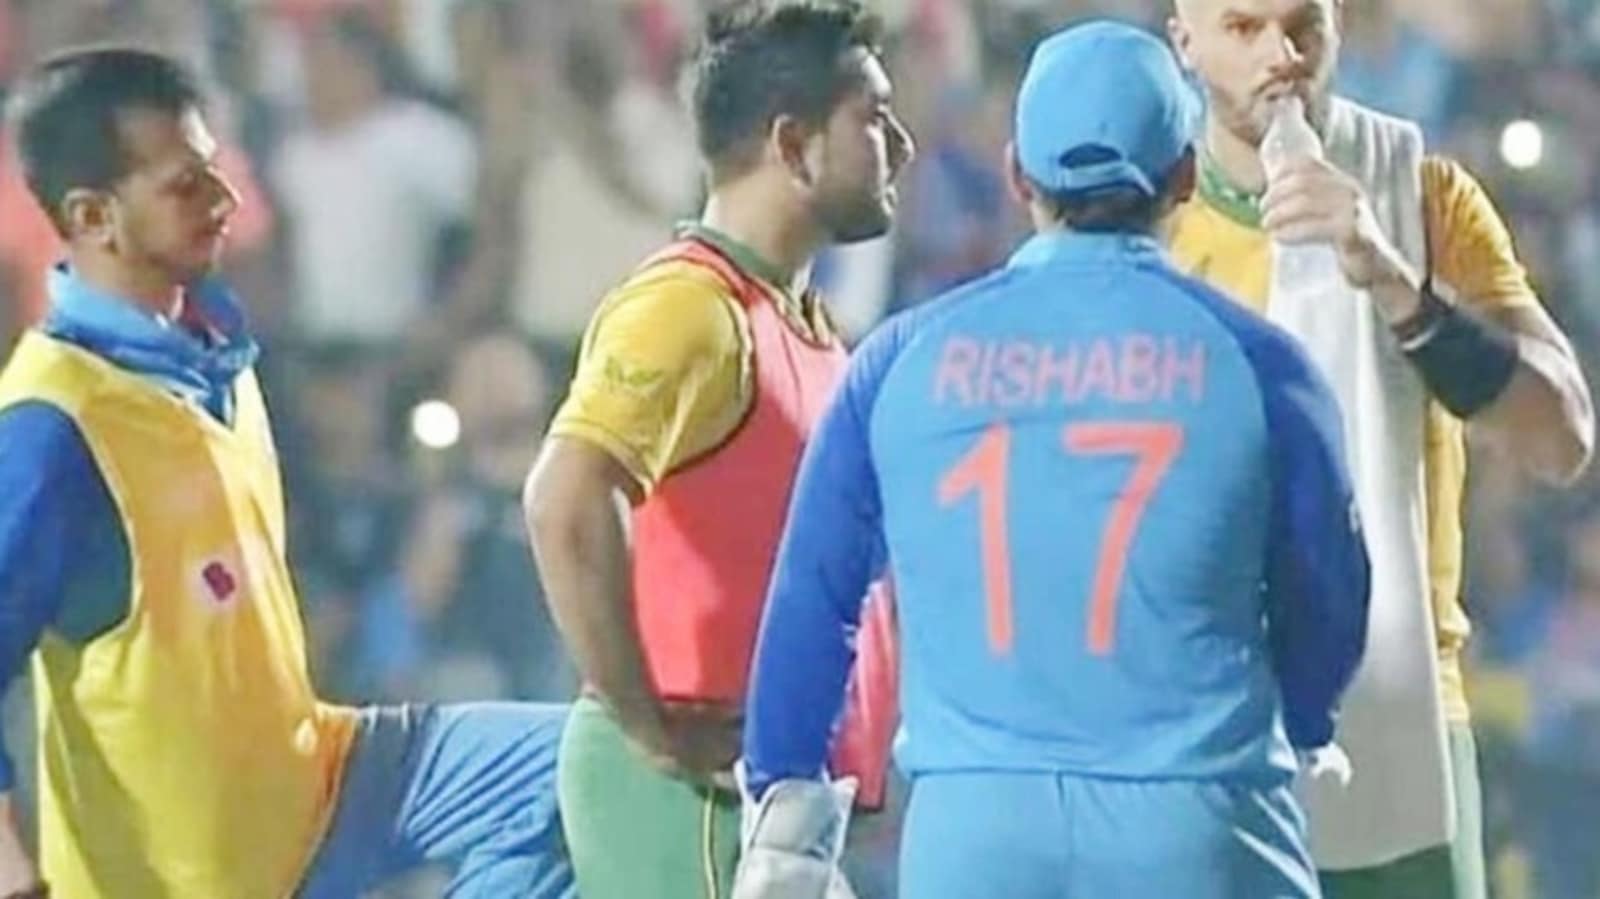 Yuzvendra Chahal kicks South Africa spinner during LIVE match, video goes viral Cricket